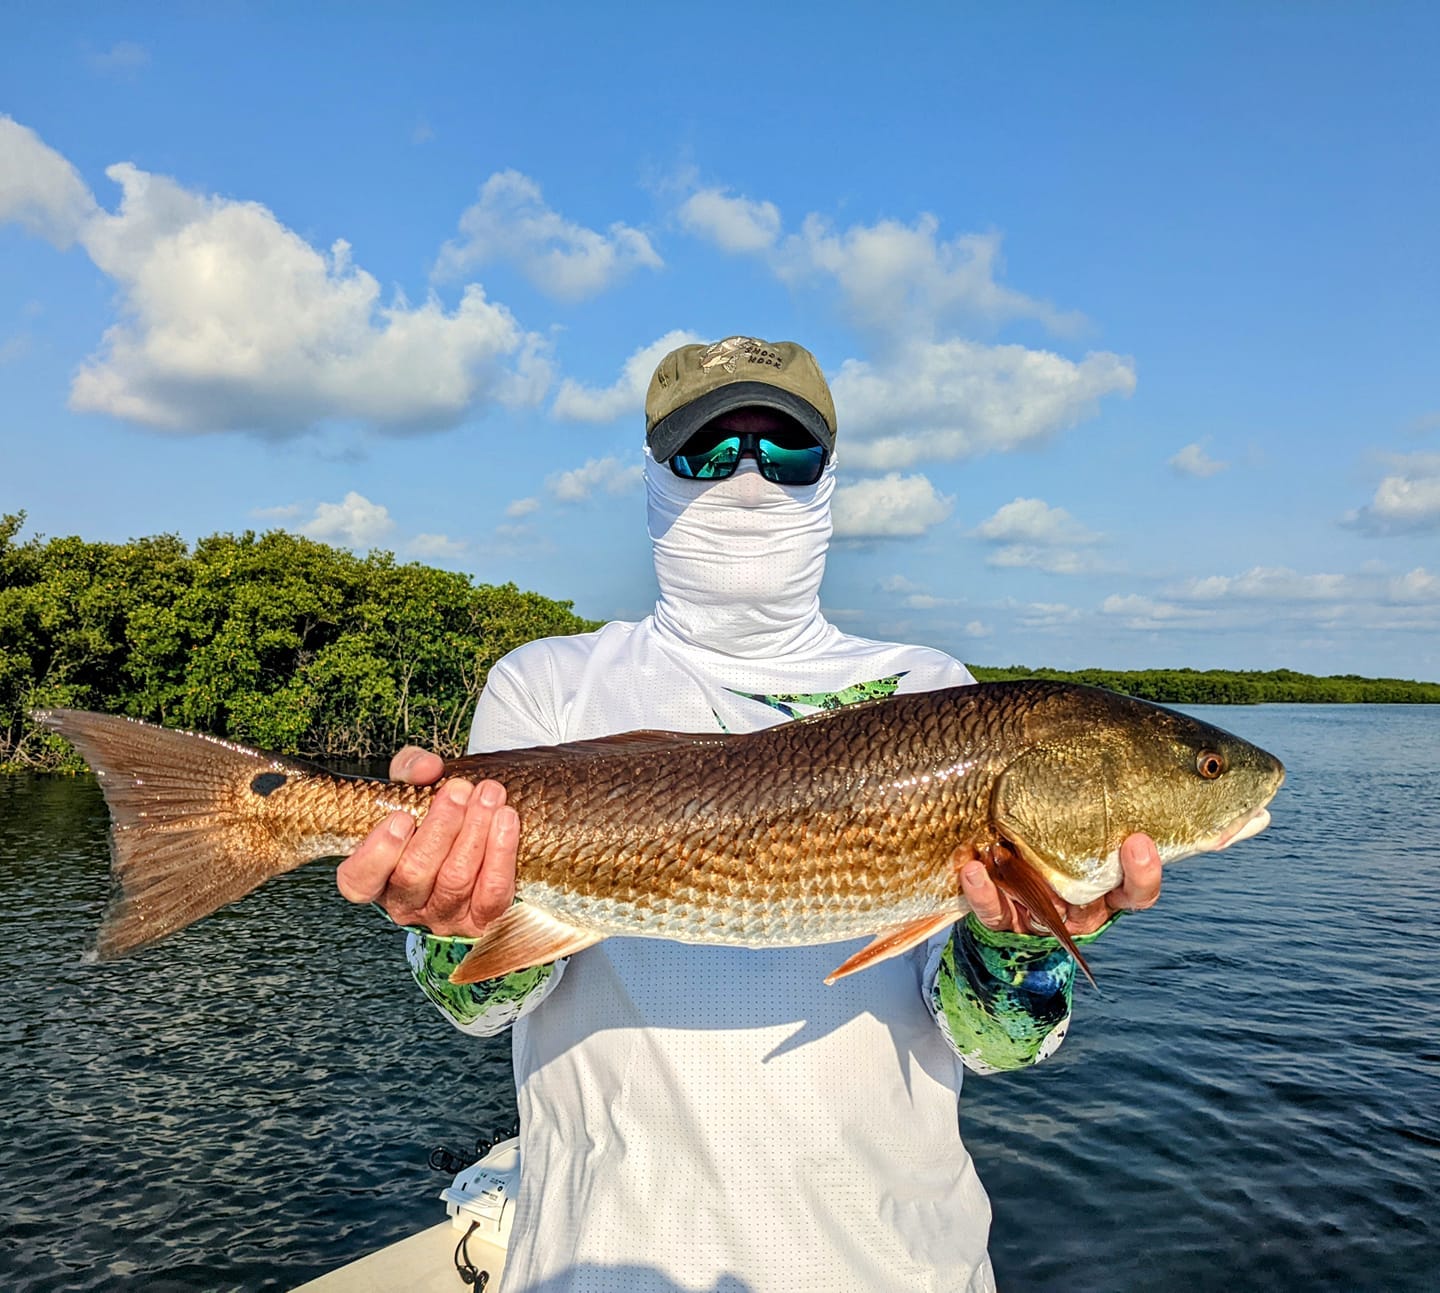 Beautiful day for chasing Redfish in the backcountry.